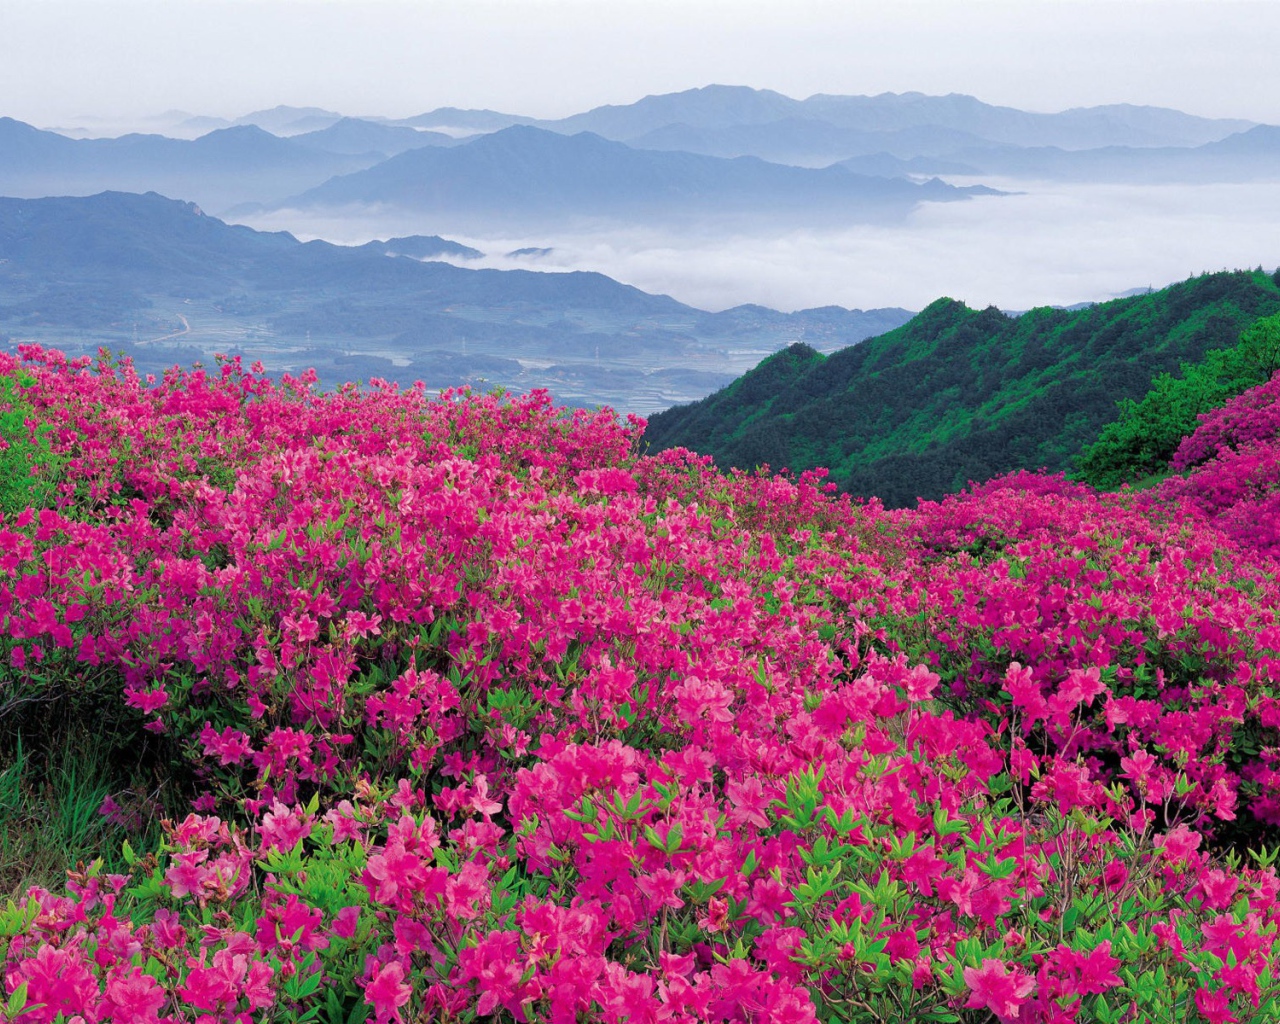 Violent flowering of pink flowers in the mountains